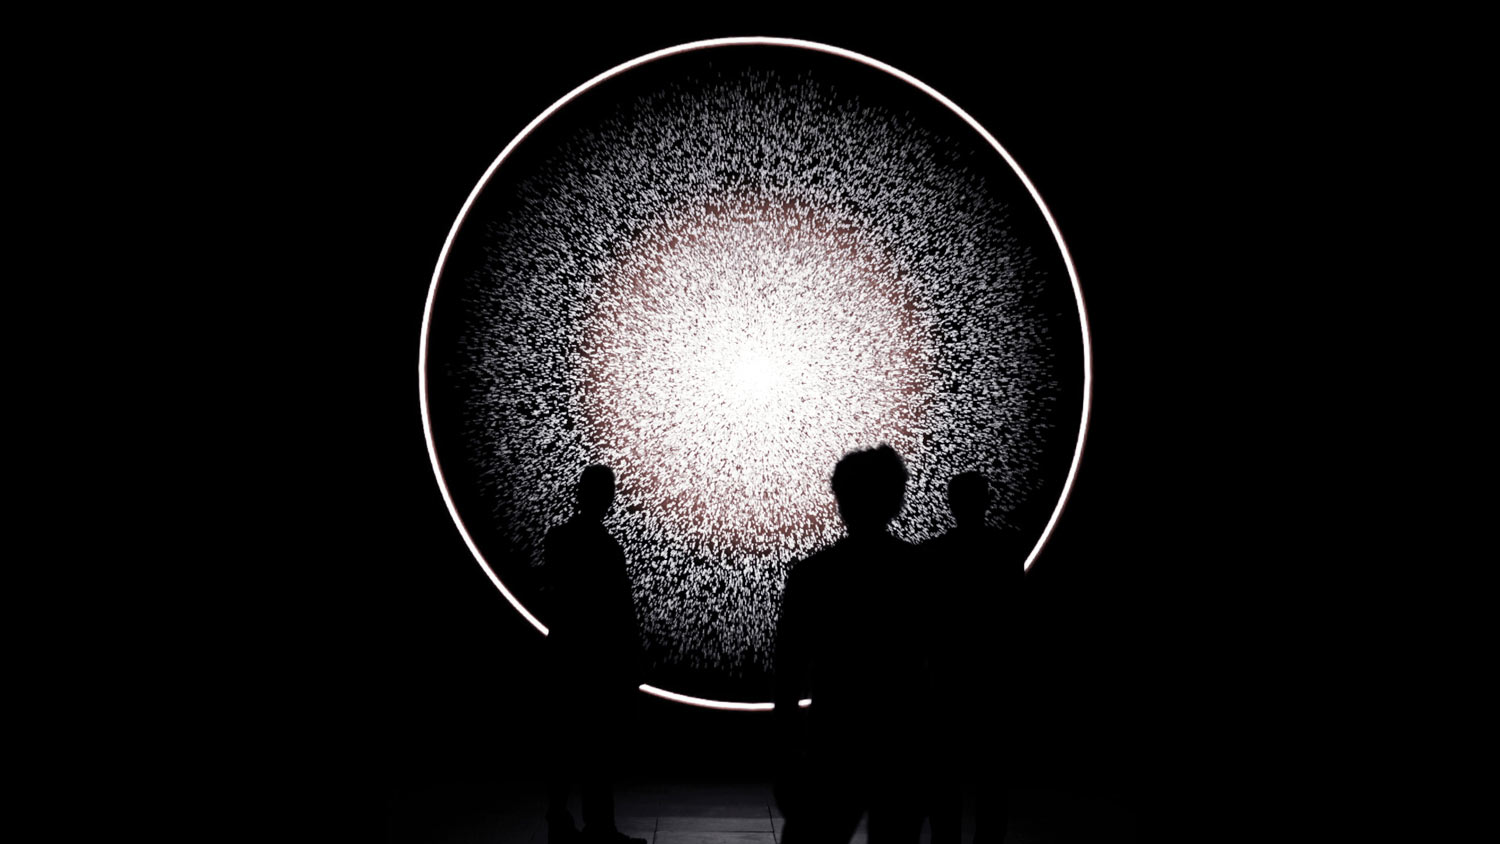 A ring of light surrounding spore like dots of light in a dark room. A small group of three people silhouetted looks on 